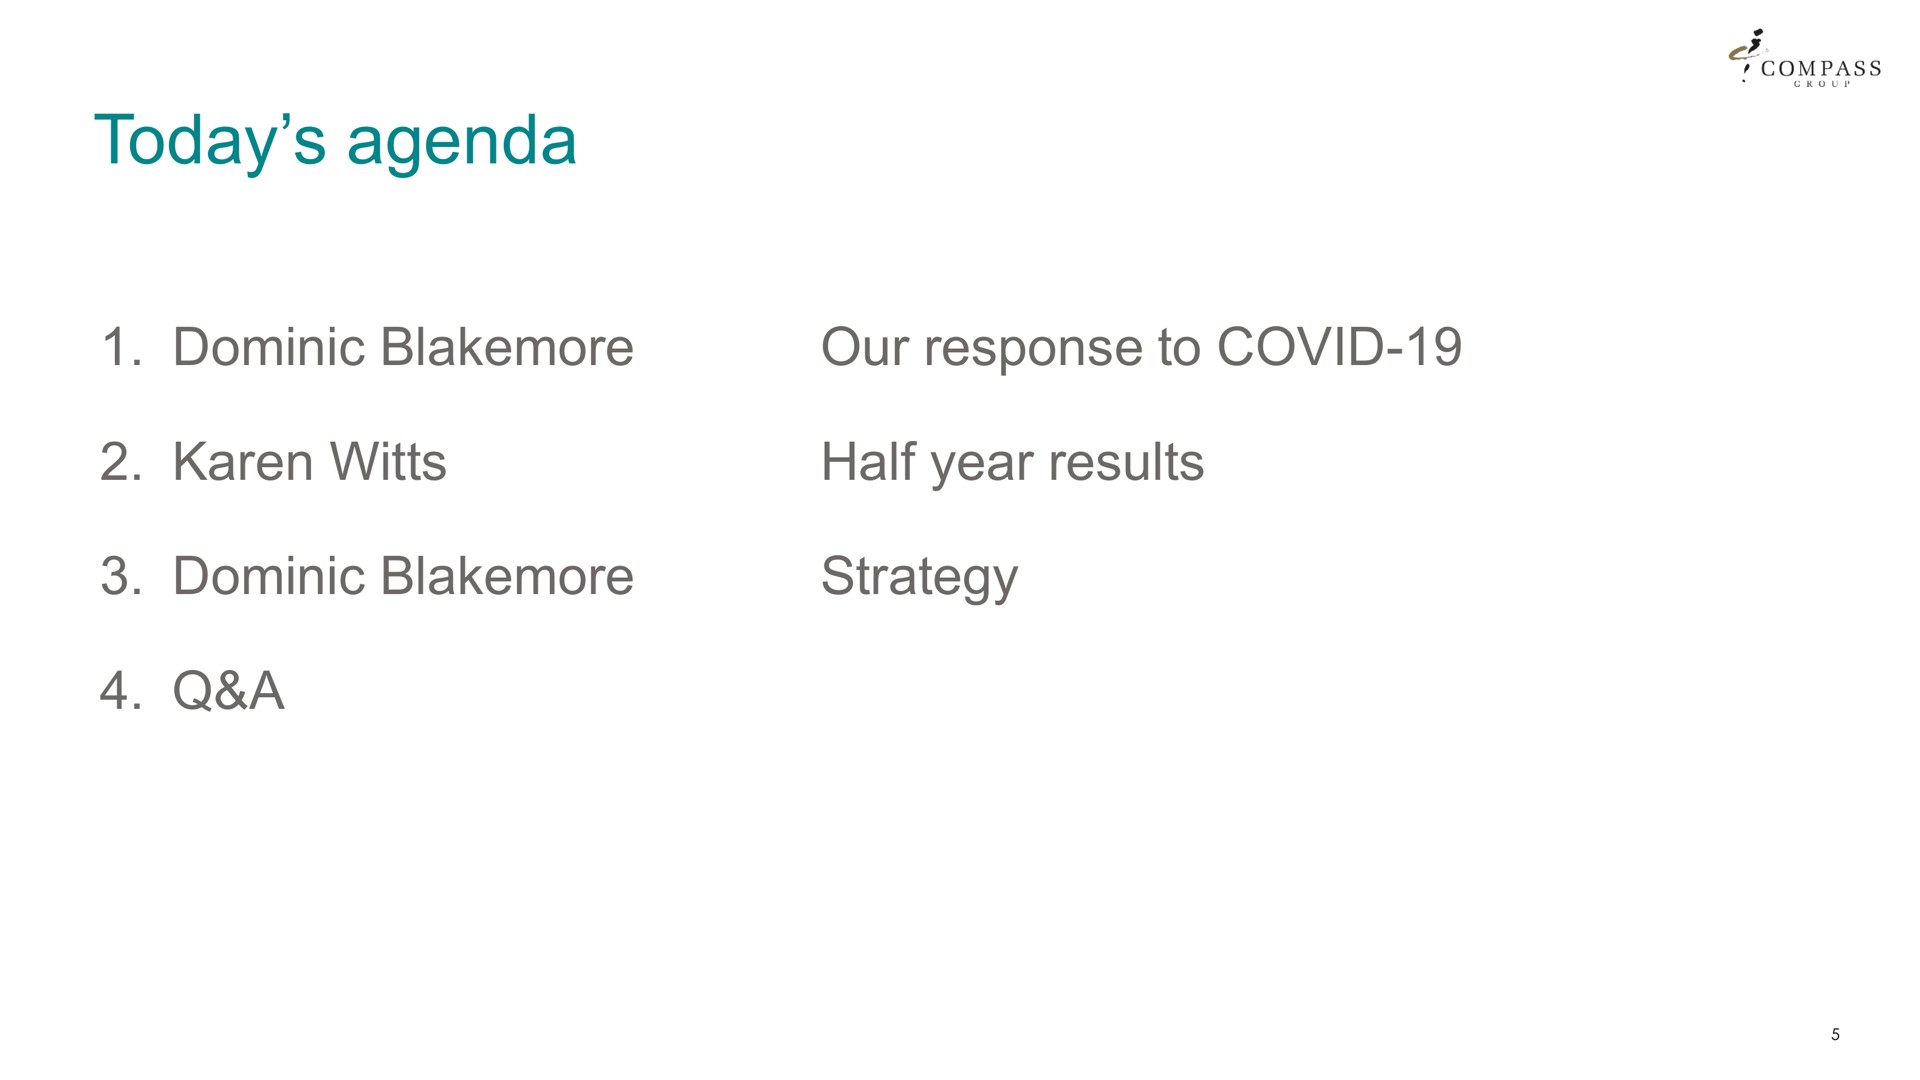 today agenda our response to covid half year results strategy a | Compass Group